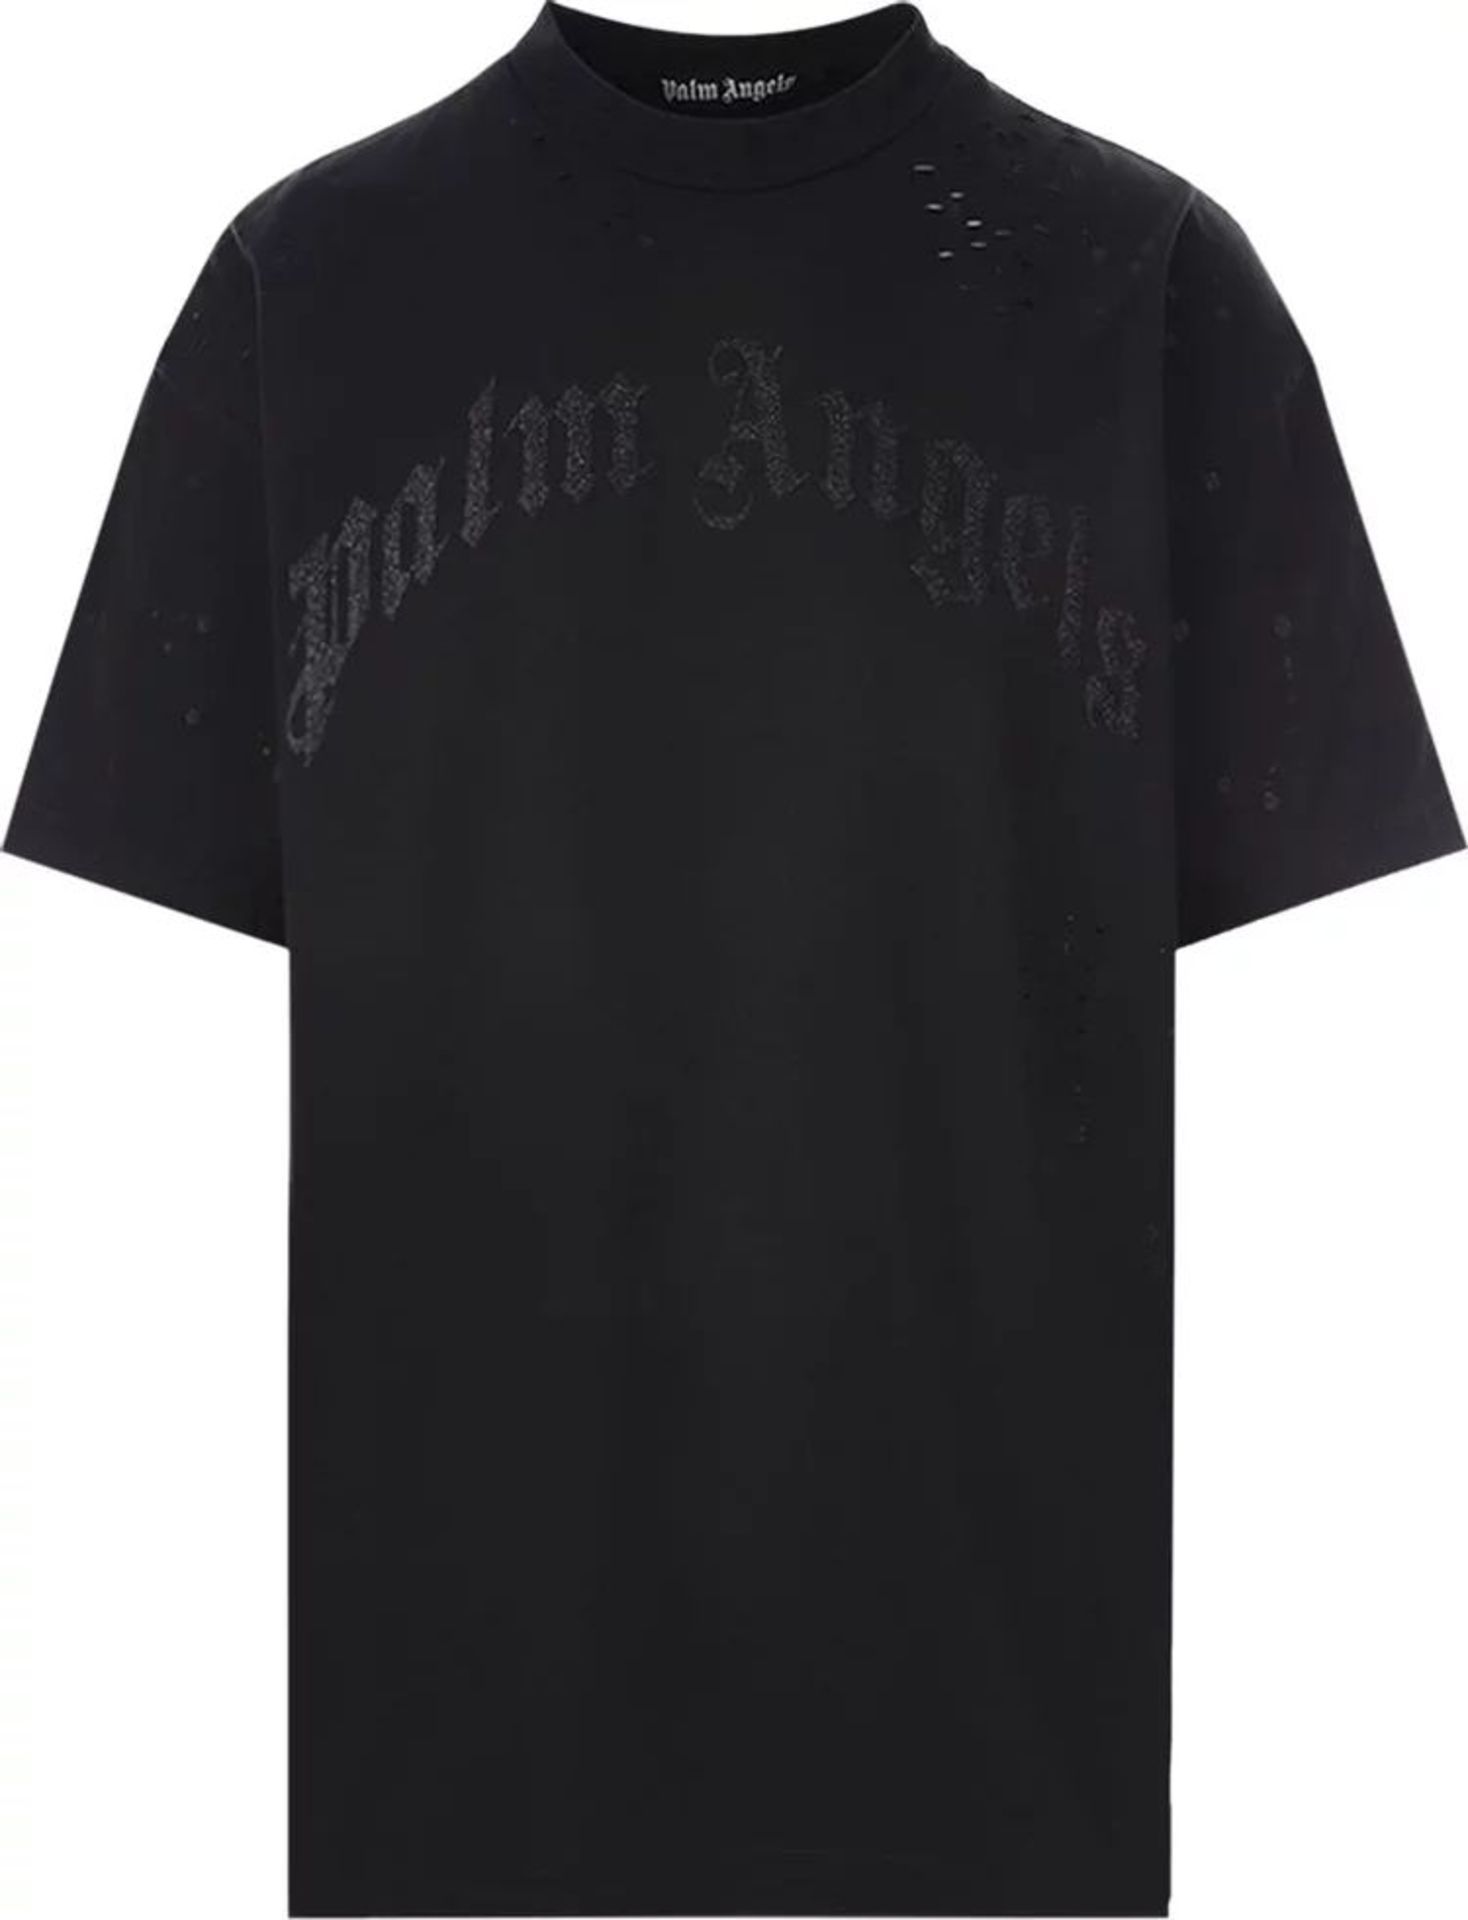 BRAND NEW PALM ANGELS Glittered Logo T-Shirt. BLACK. SIZE LARGE. RRP £445. (OFC)